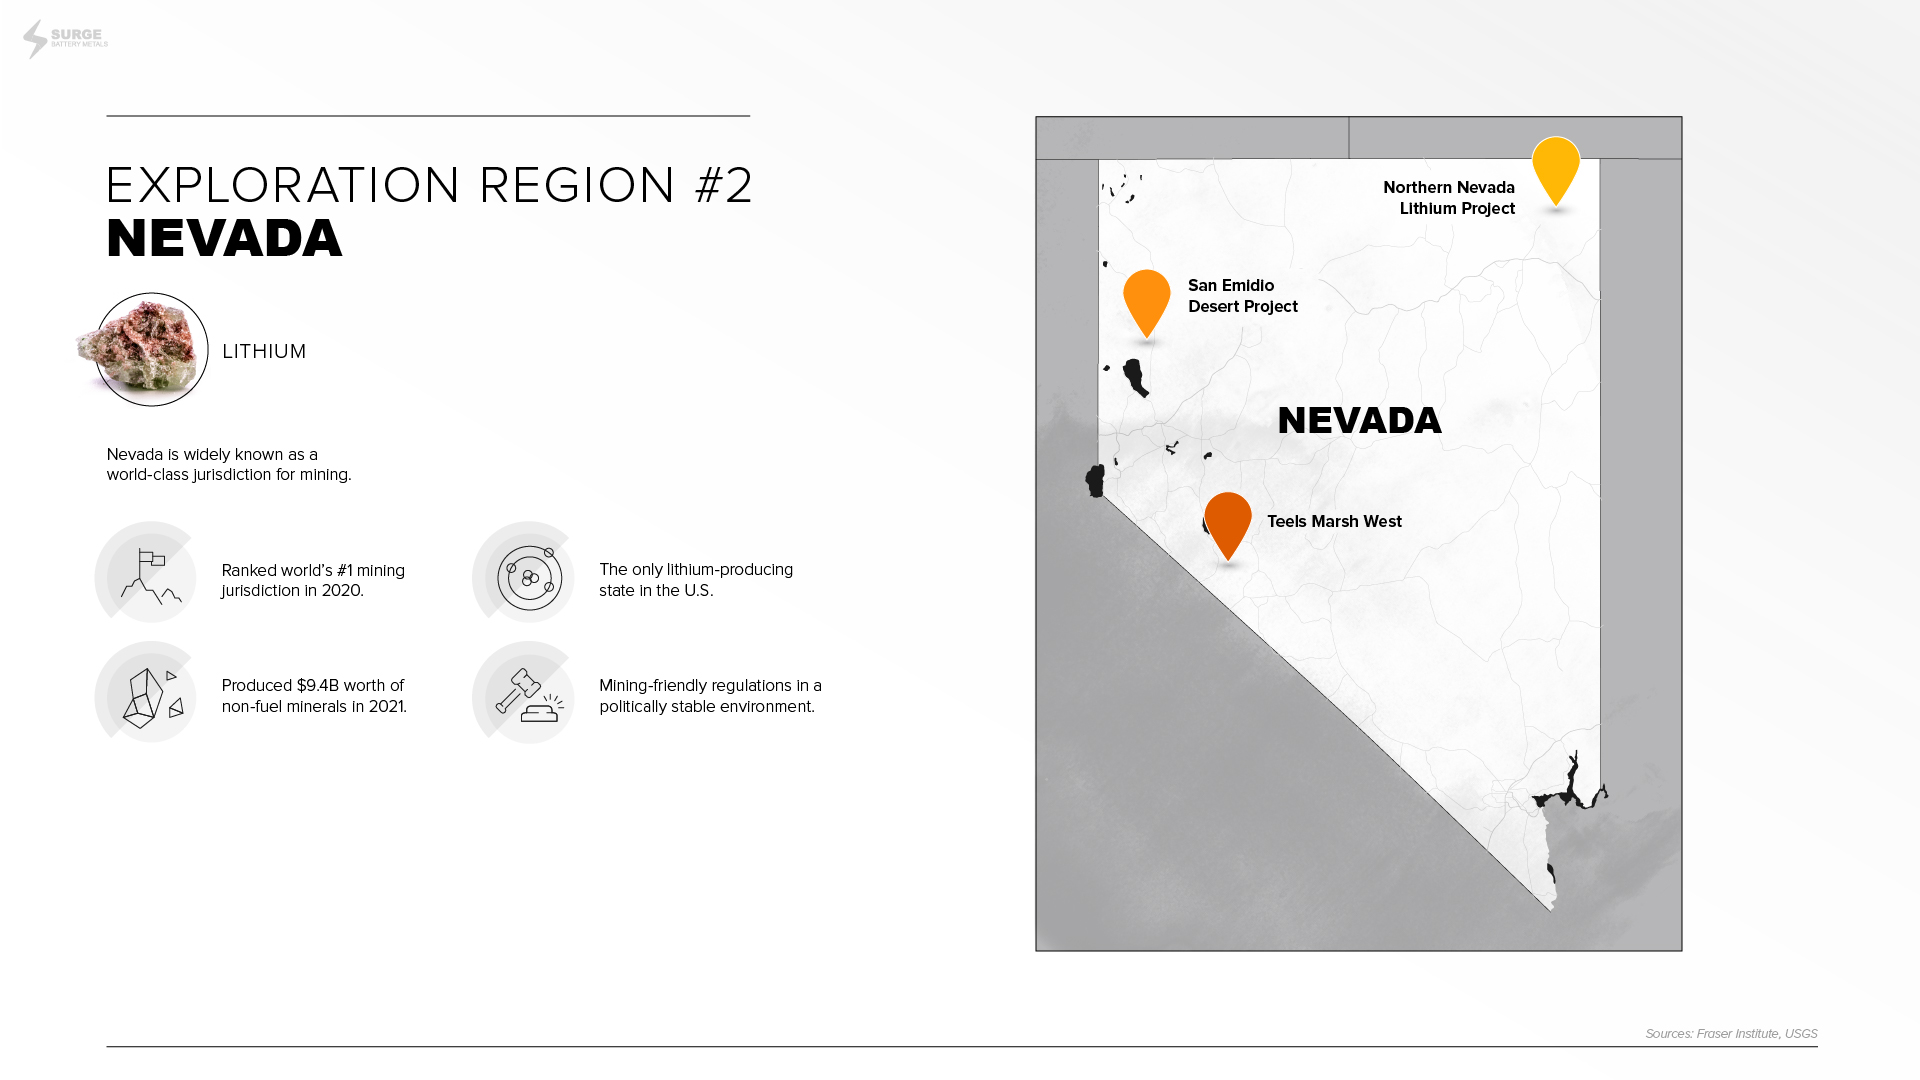 State map of Nevada, U.S., is shown, with key facts about the jurisdiction in relation to lithium production.